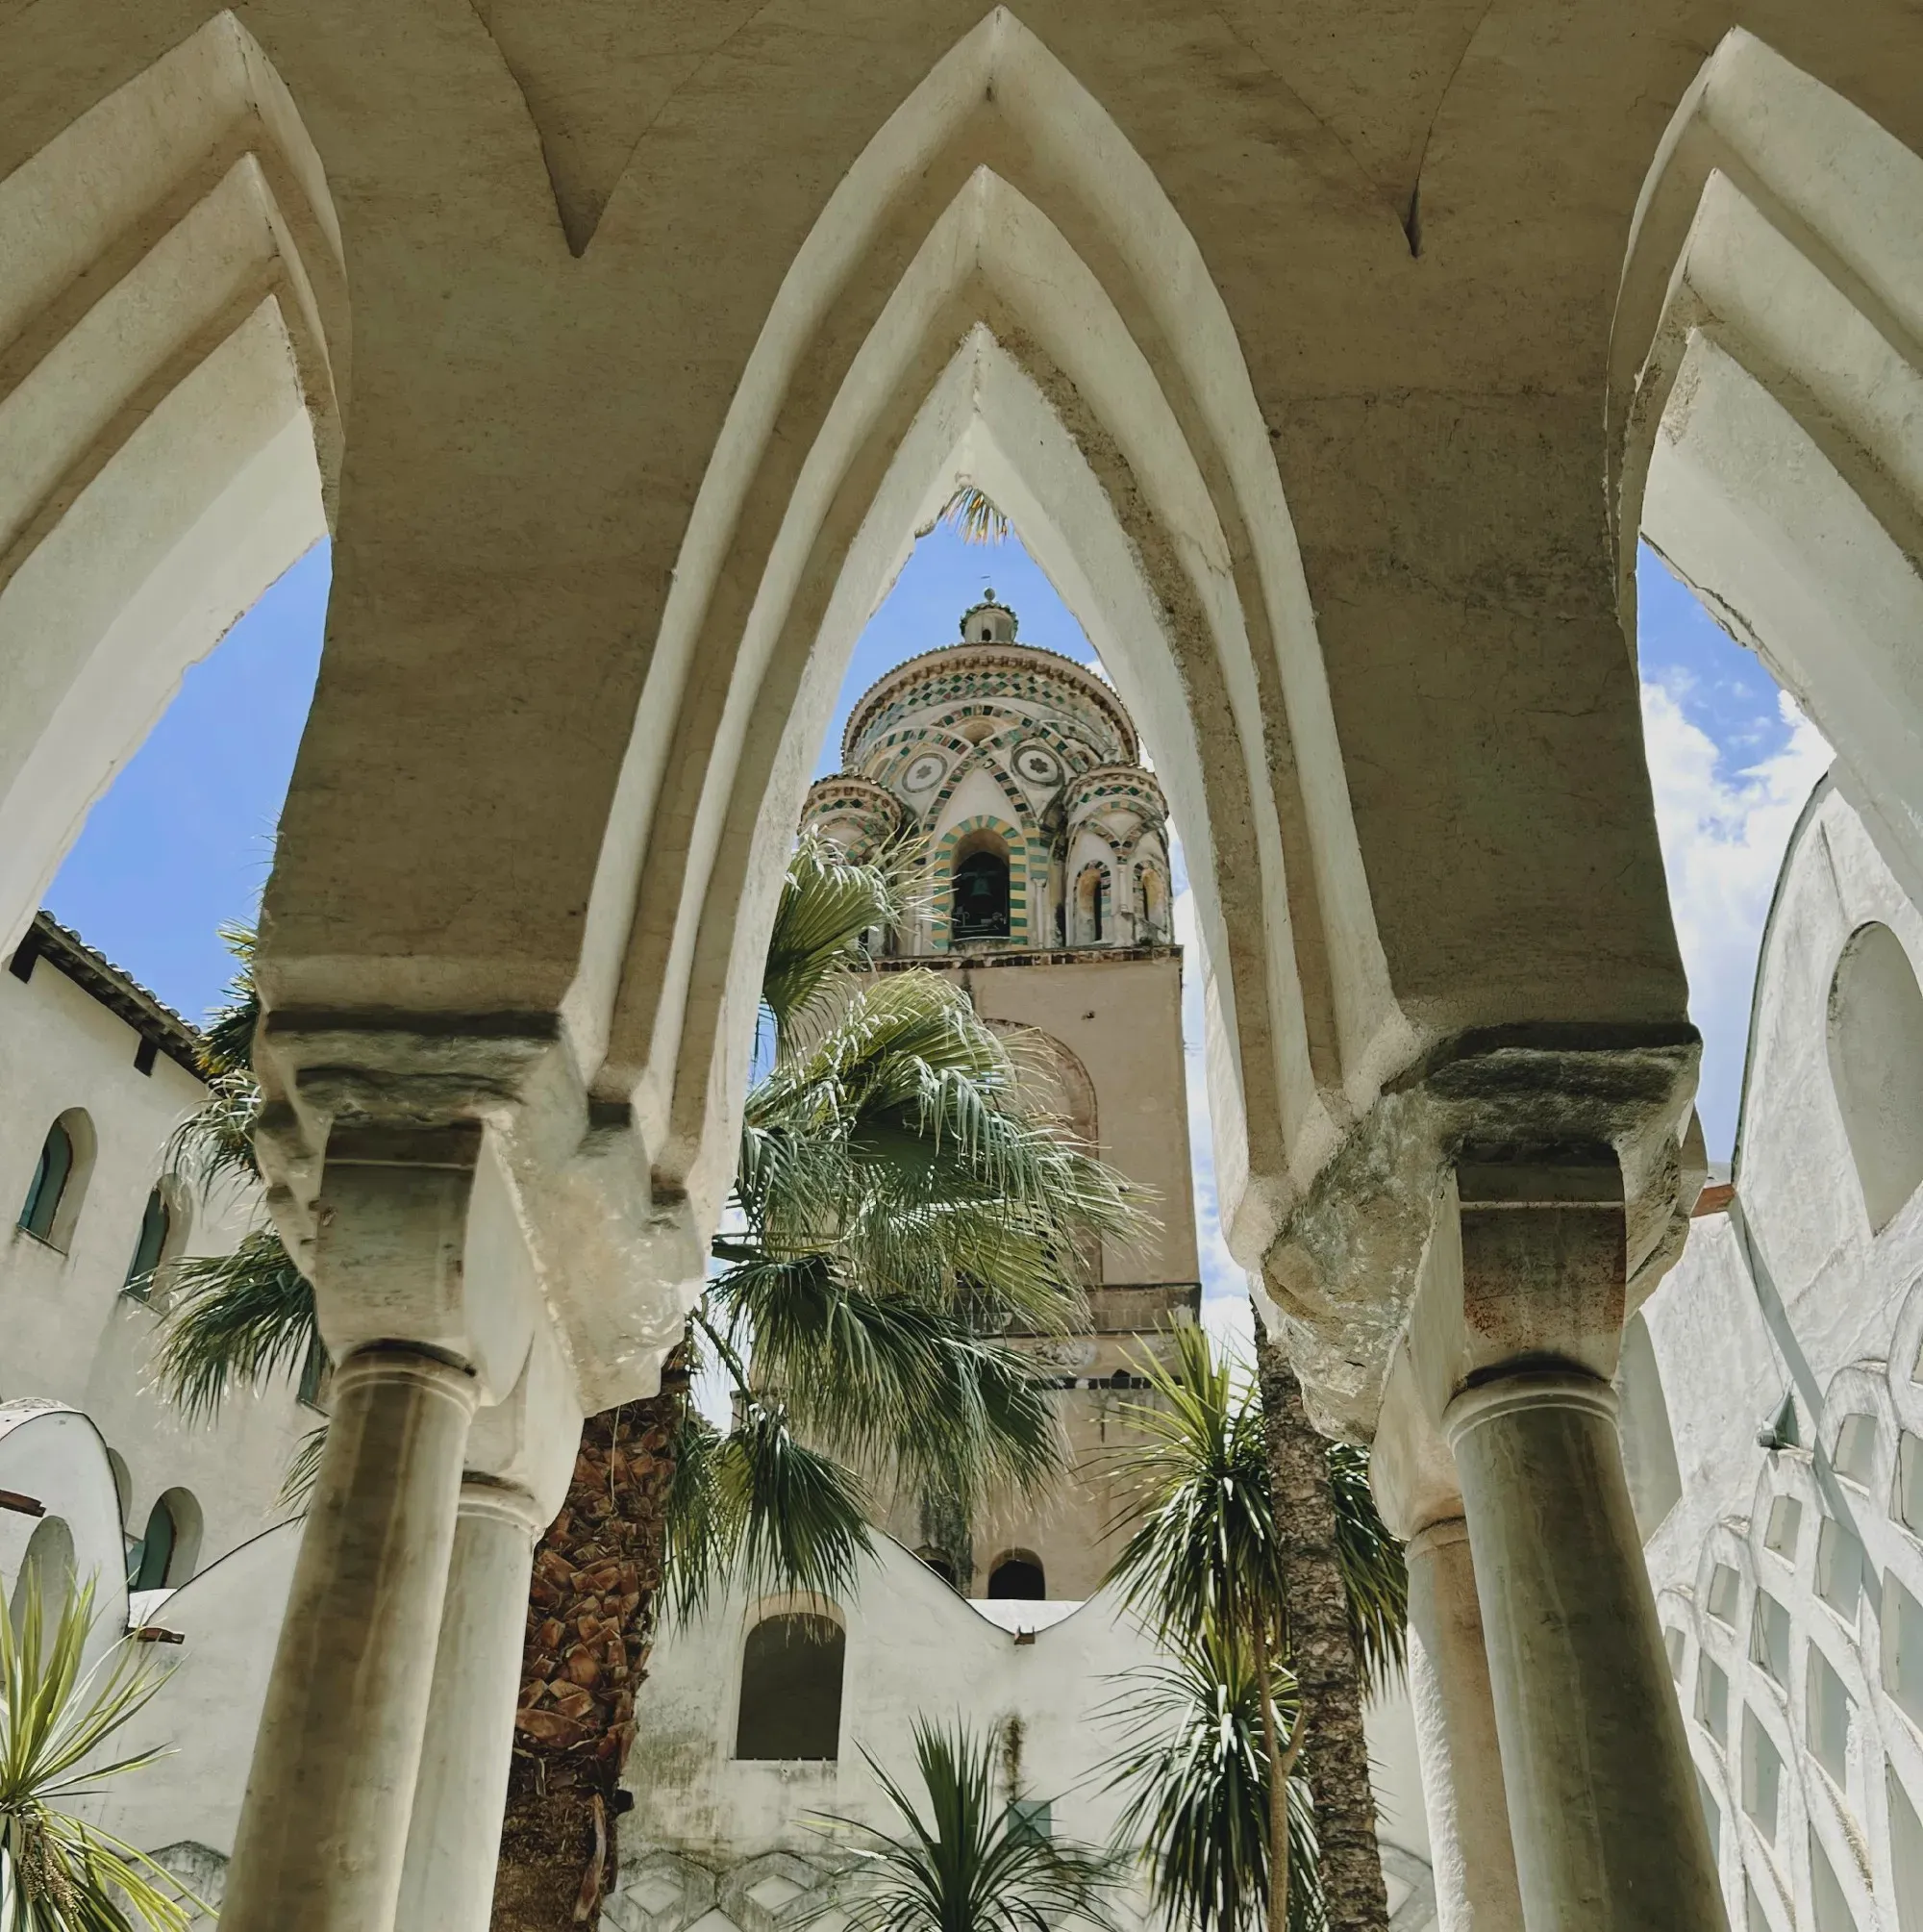 Artsy shot of the Amalfi cathedral's steeple, framed between pointed arches and columns.